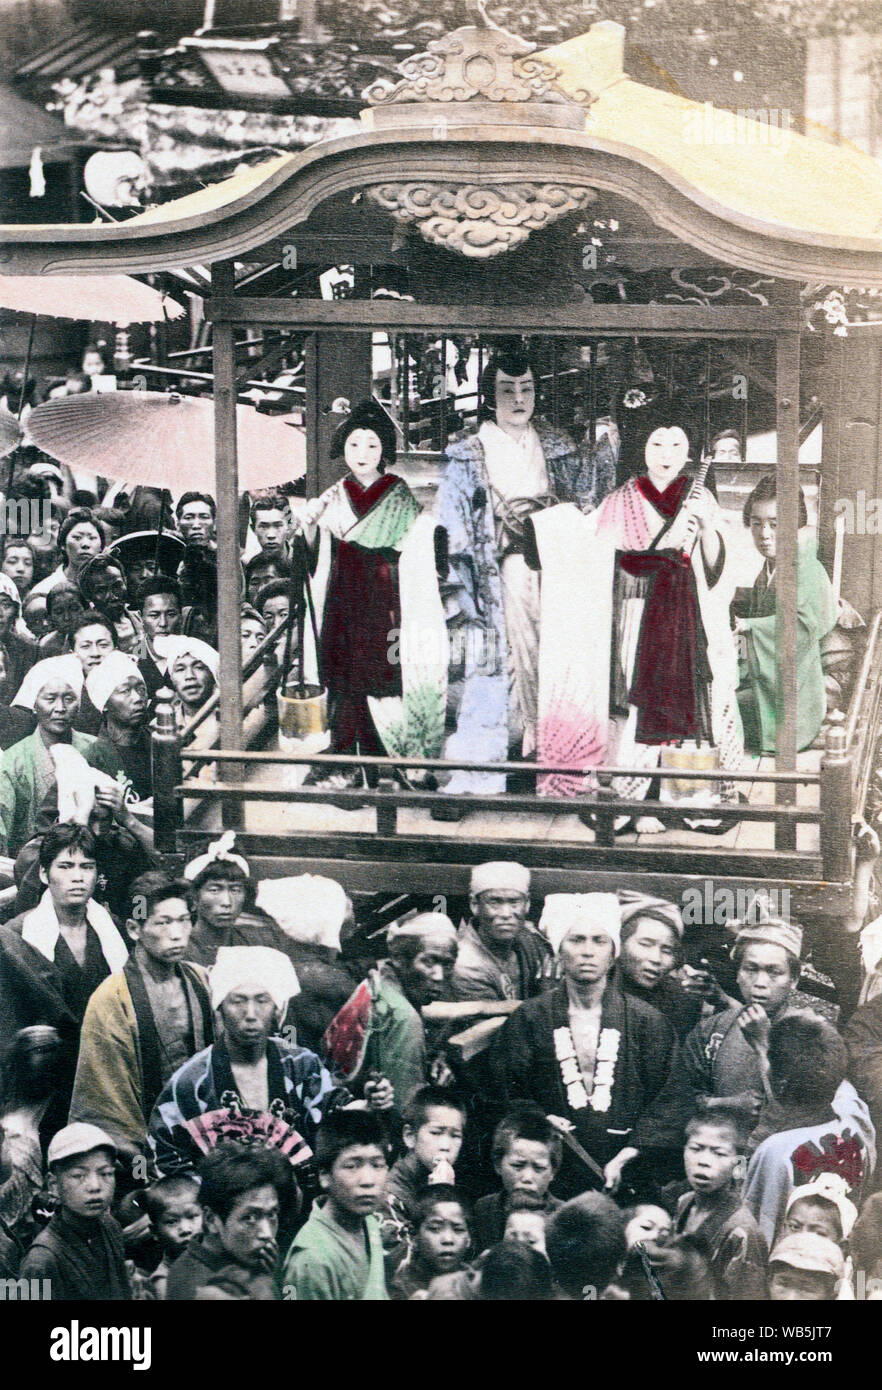 [ 1890s Japan - Performers at a Japanese Festival ] —   Three costumed performers on a stage of what appears to be a danjiri (float) perform a dance during a matsuri (religious festival).  Albumen photograph sourced by Kozaburo Tamamura (1856-1923?), 1890s, for 'Japan, Described and Illustrated by the Japanese', Shogun Edition edited by Captain F Brinkley. Published in 1897 by J B Millet Company, Boston Massachusetts, USA.  19th century vintage albumen photograph. Stock Photo